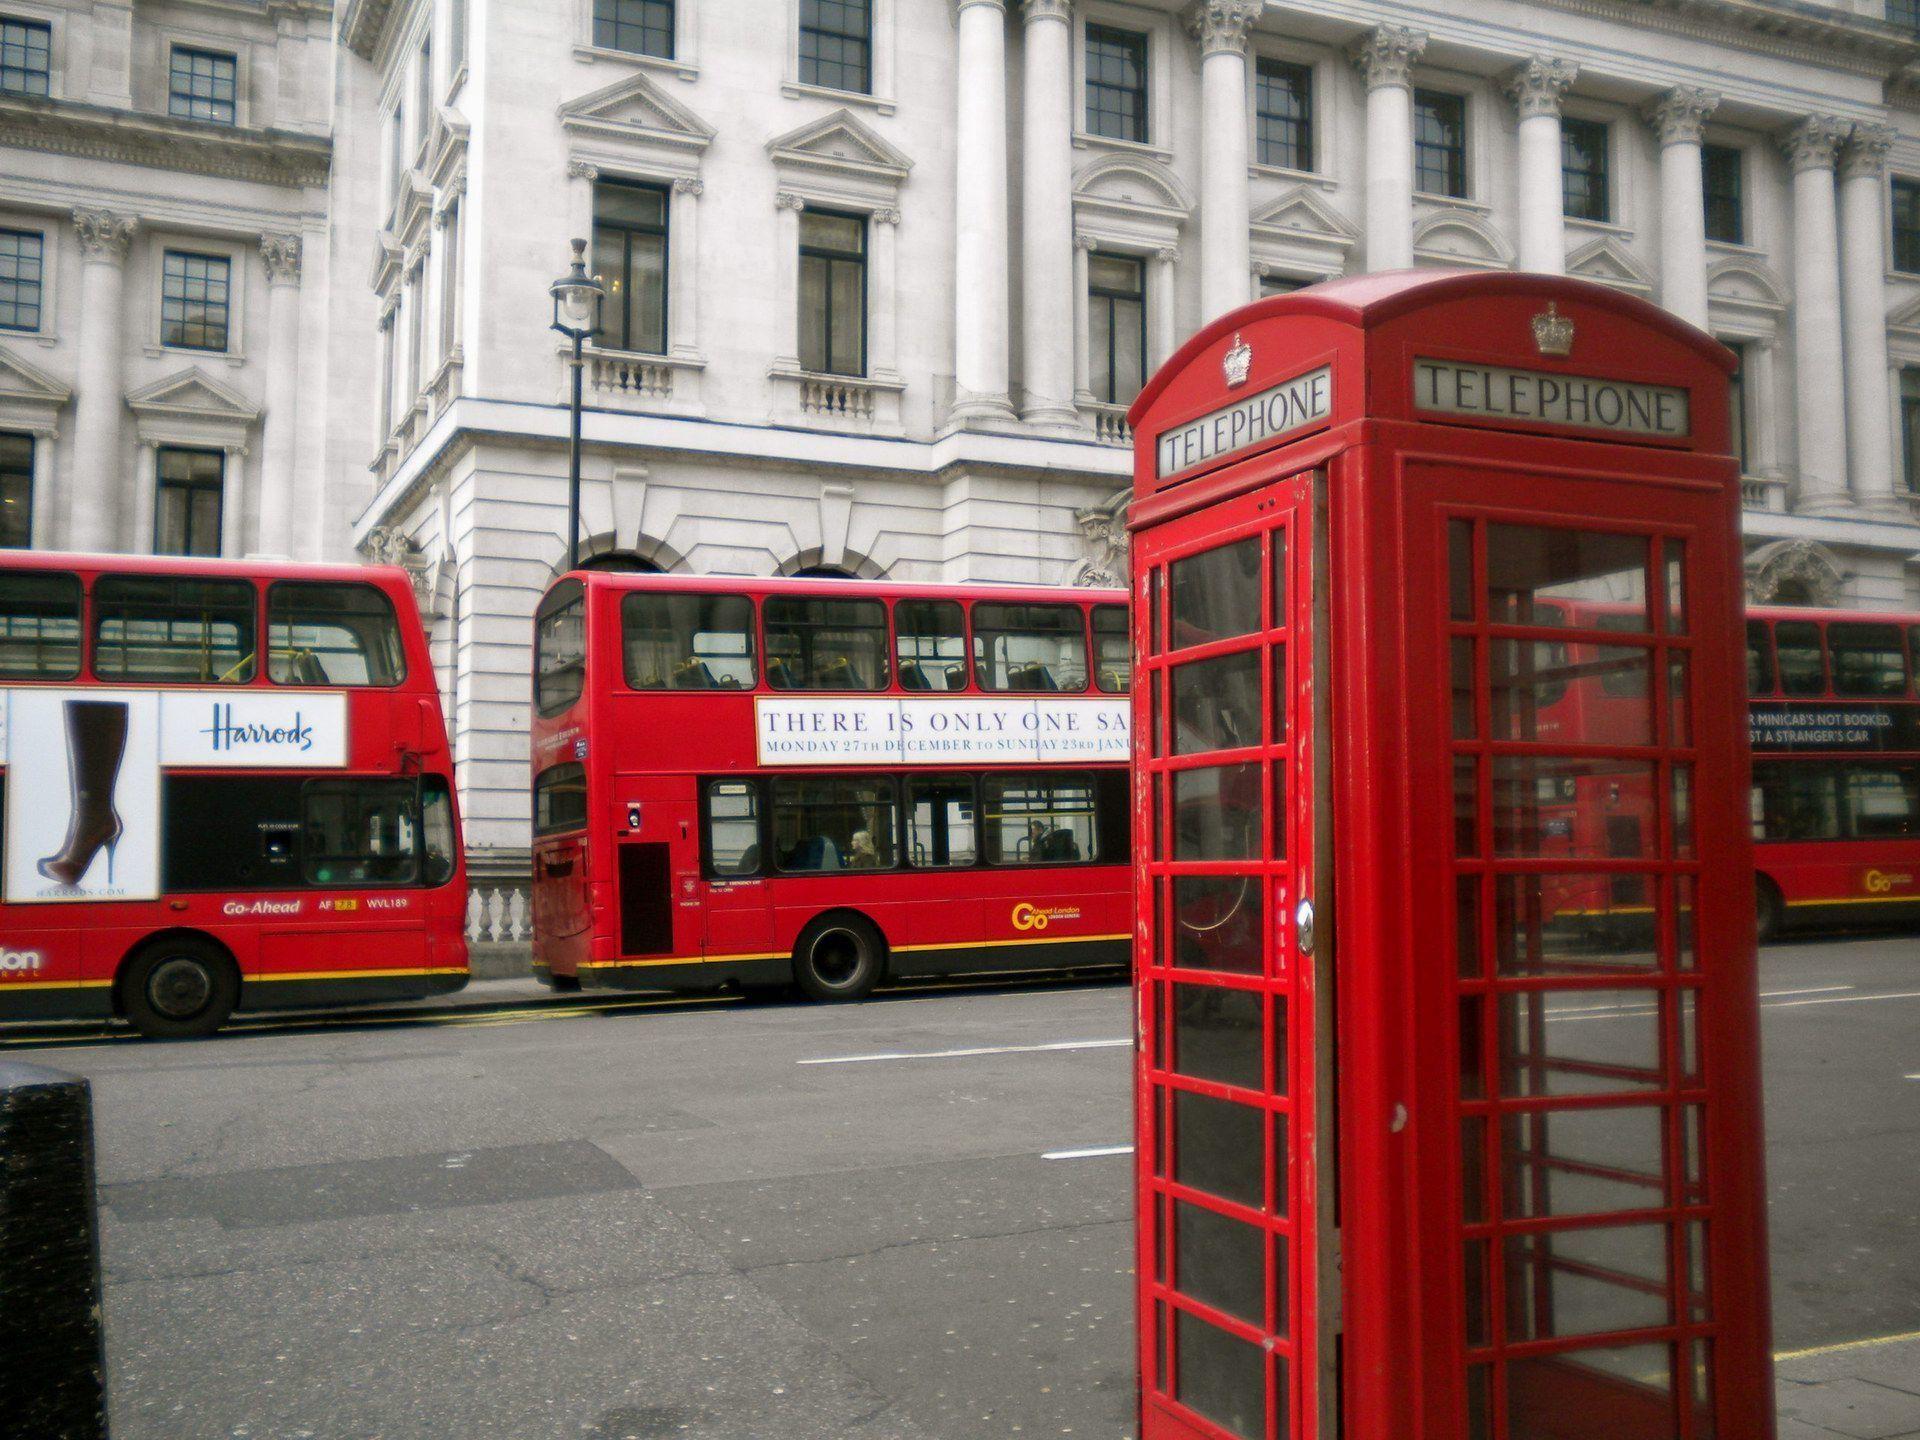 English phone booth, London, England Travel photo and wallpaper